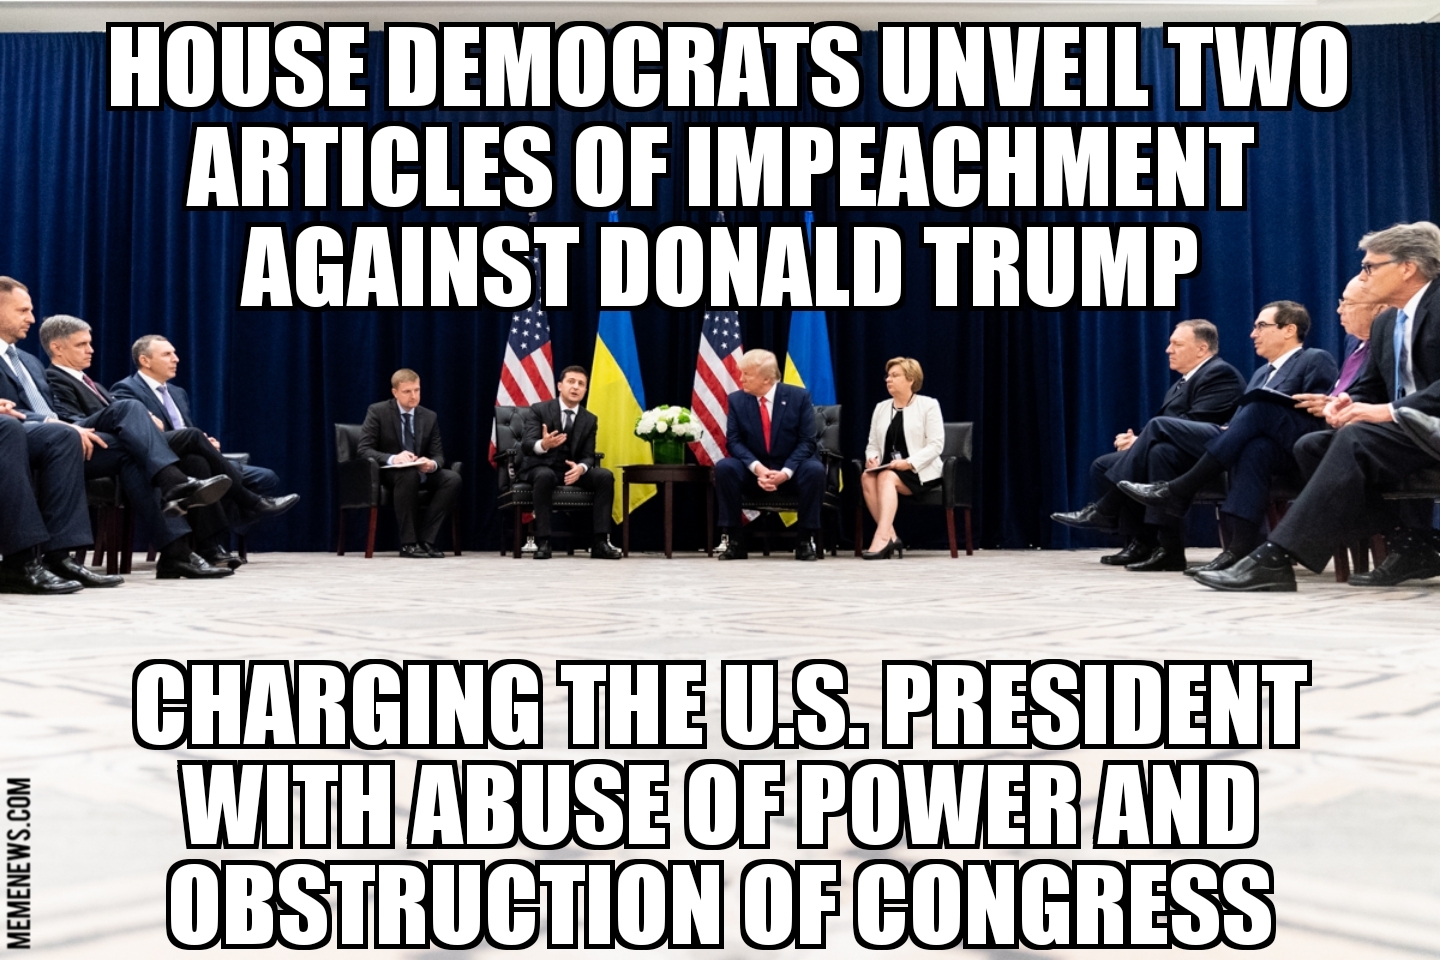 House Democrats unveil two articles of impeachment against President Trump